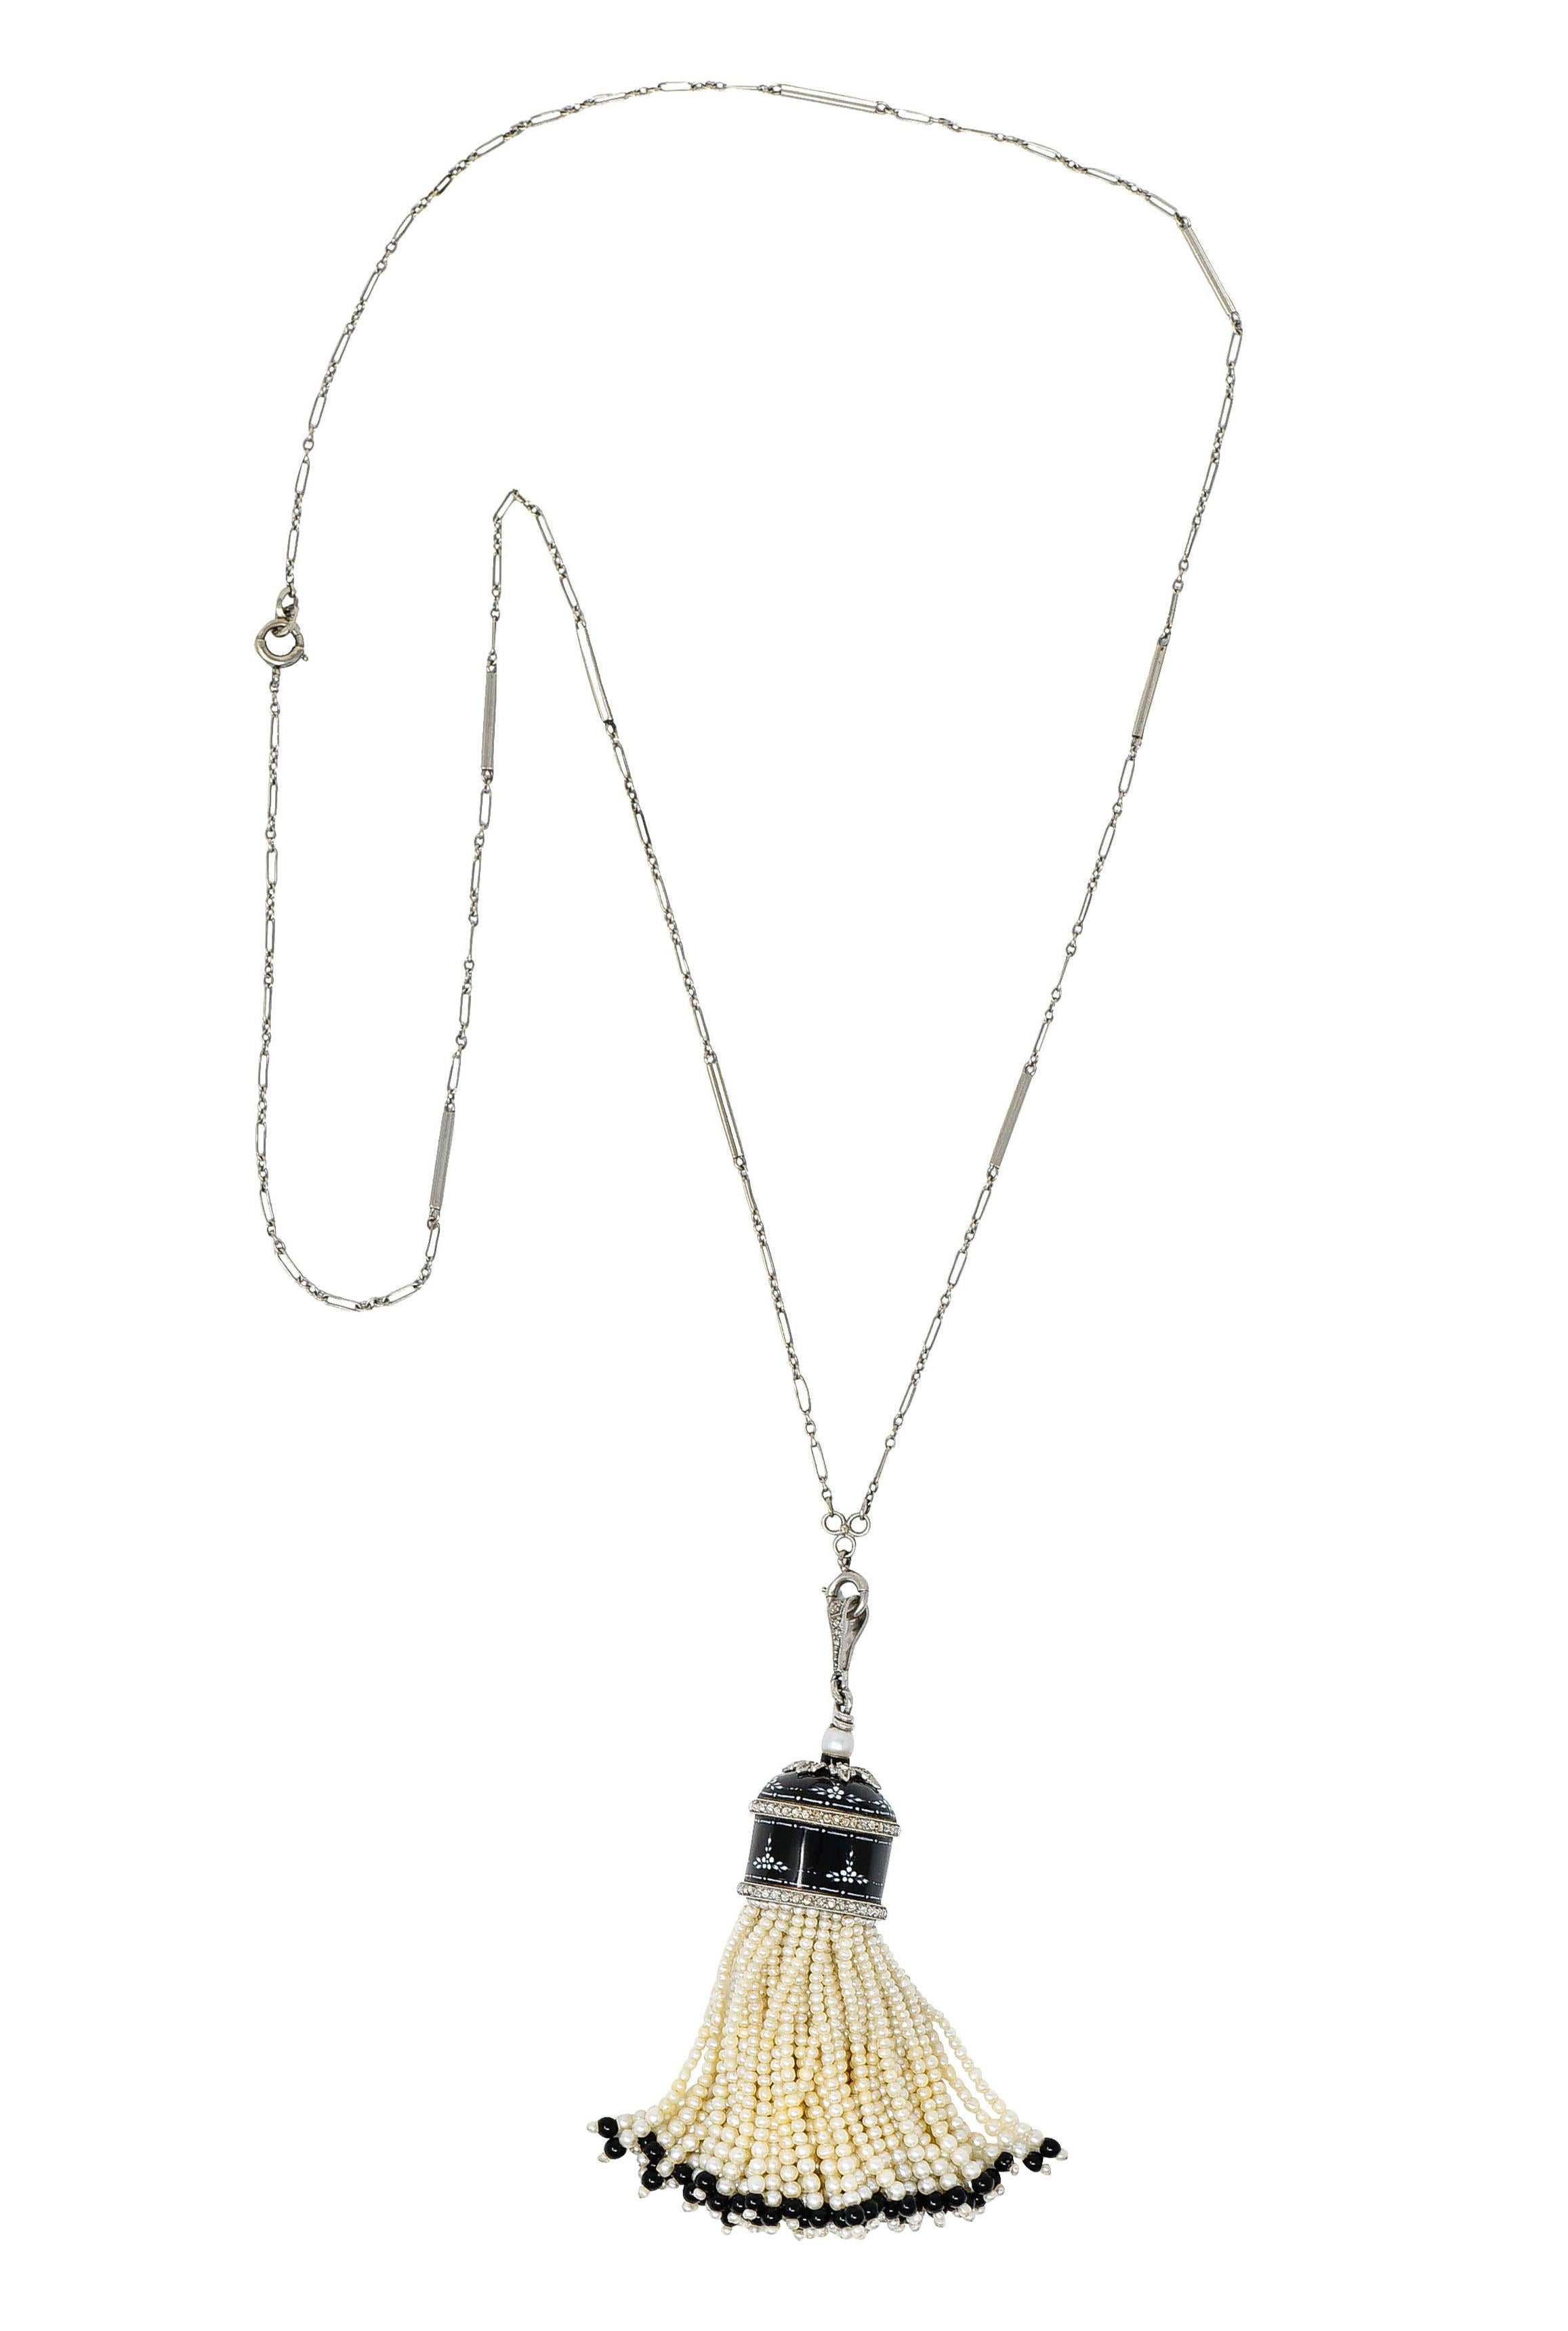 Centering a tassel pendant glossed with black enamel accented by hand-painted floral details

With milgrain platinum details as two bands, a floral motif, and bale - all accented by rose cut diamonds - one missing

Topped by a bright white 4.2 mm